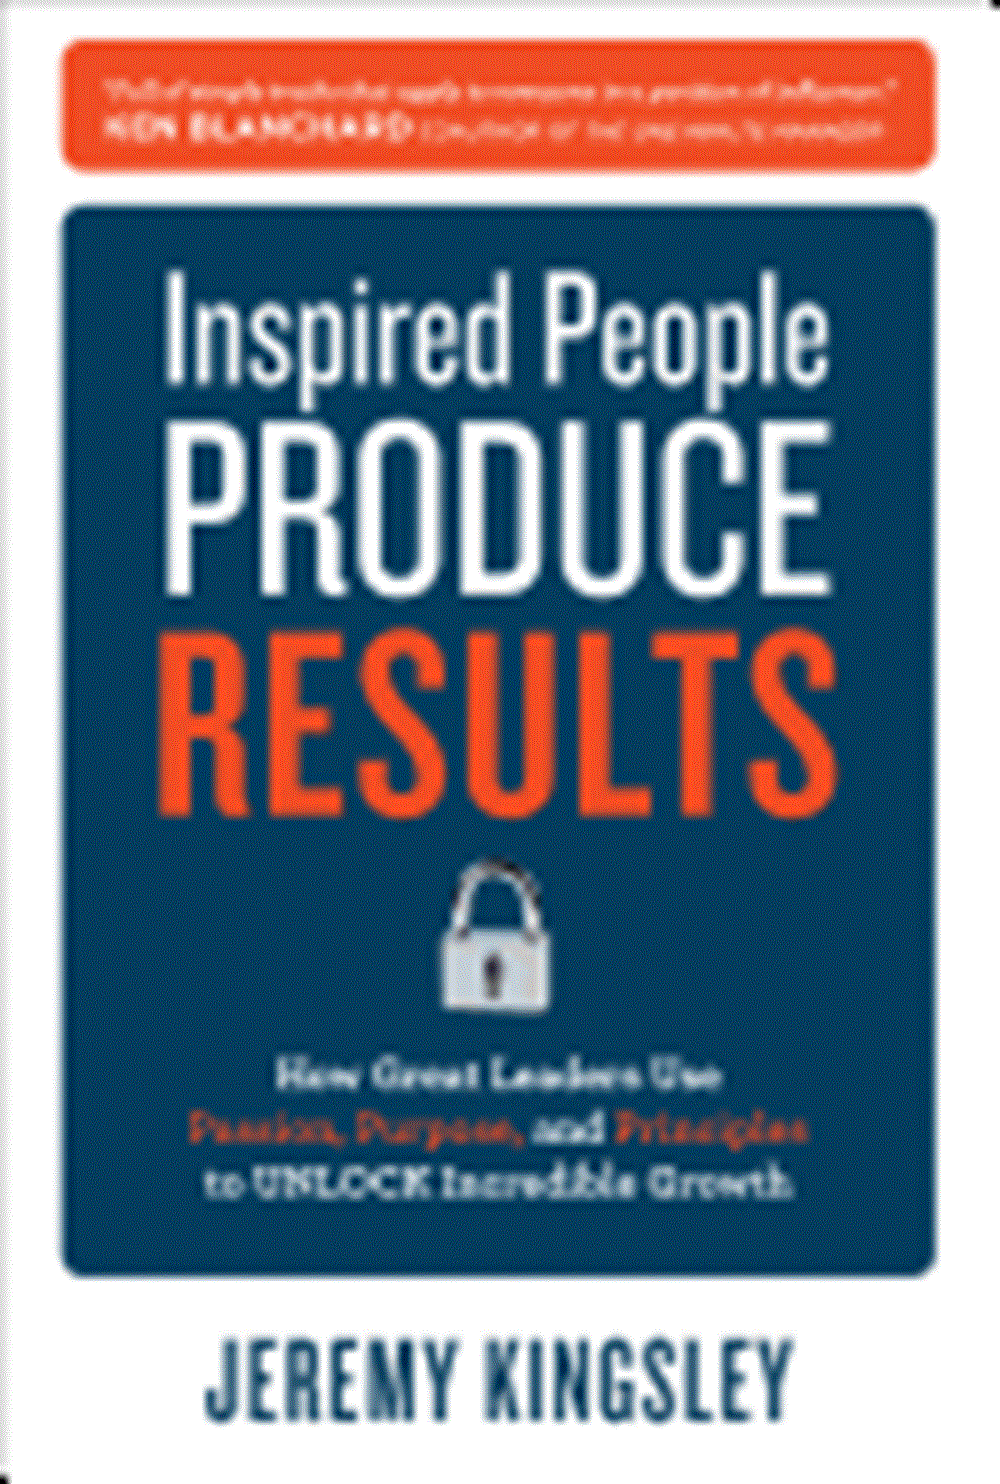 Inspired People Produce Results: How Great Leaders Use Passion, Purpose and Principles to Unlock Inc